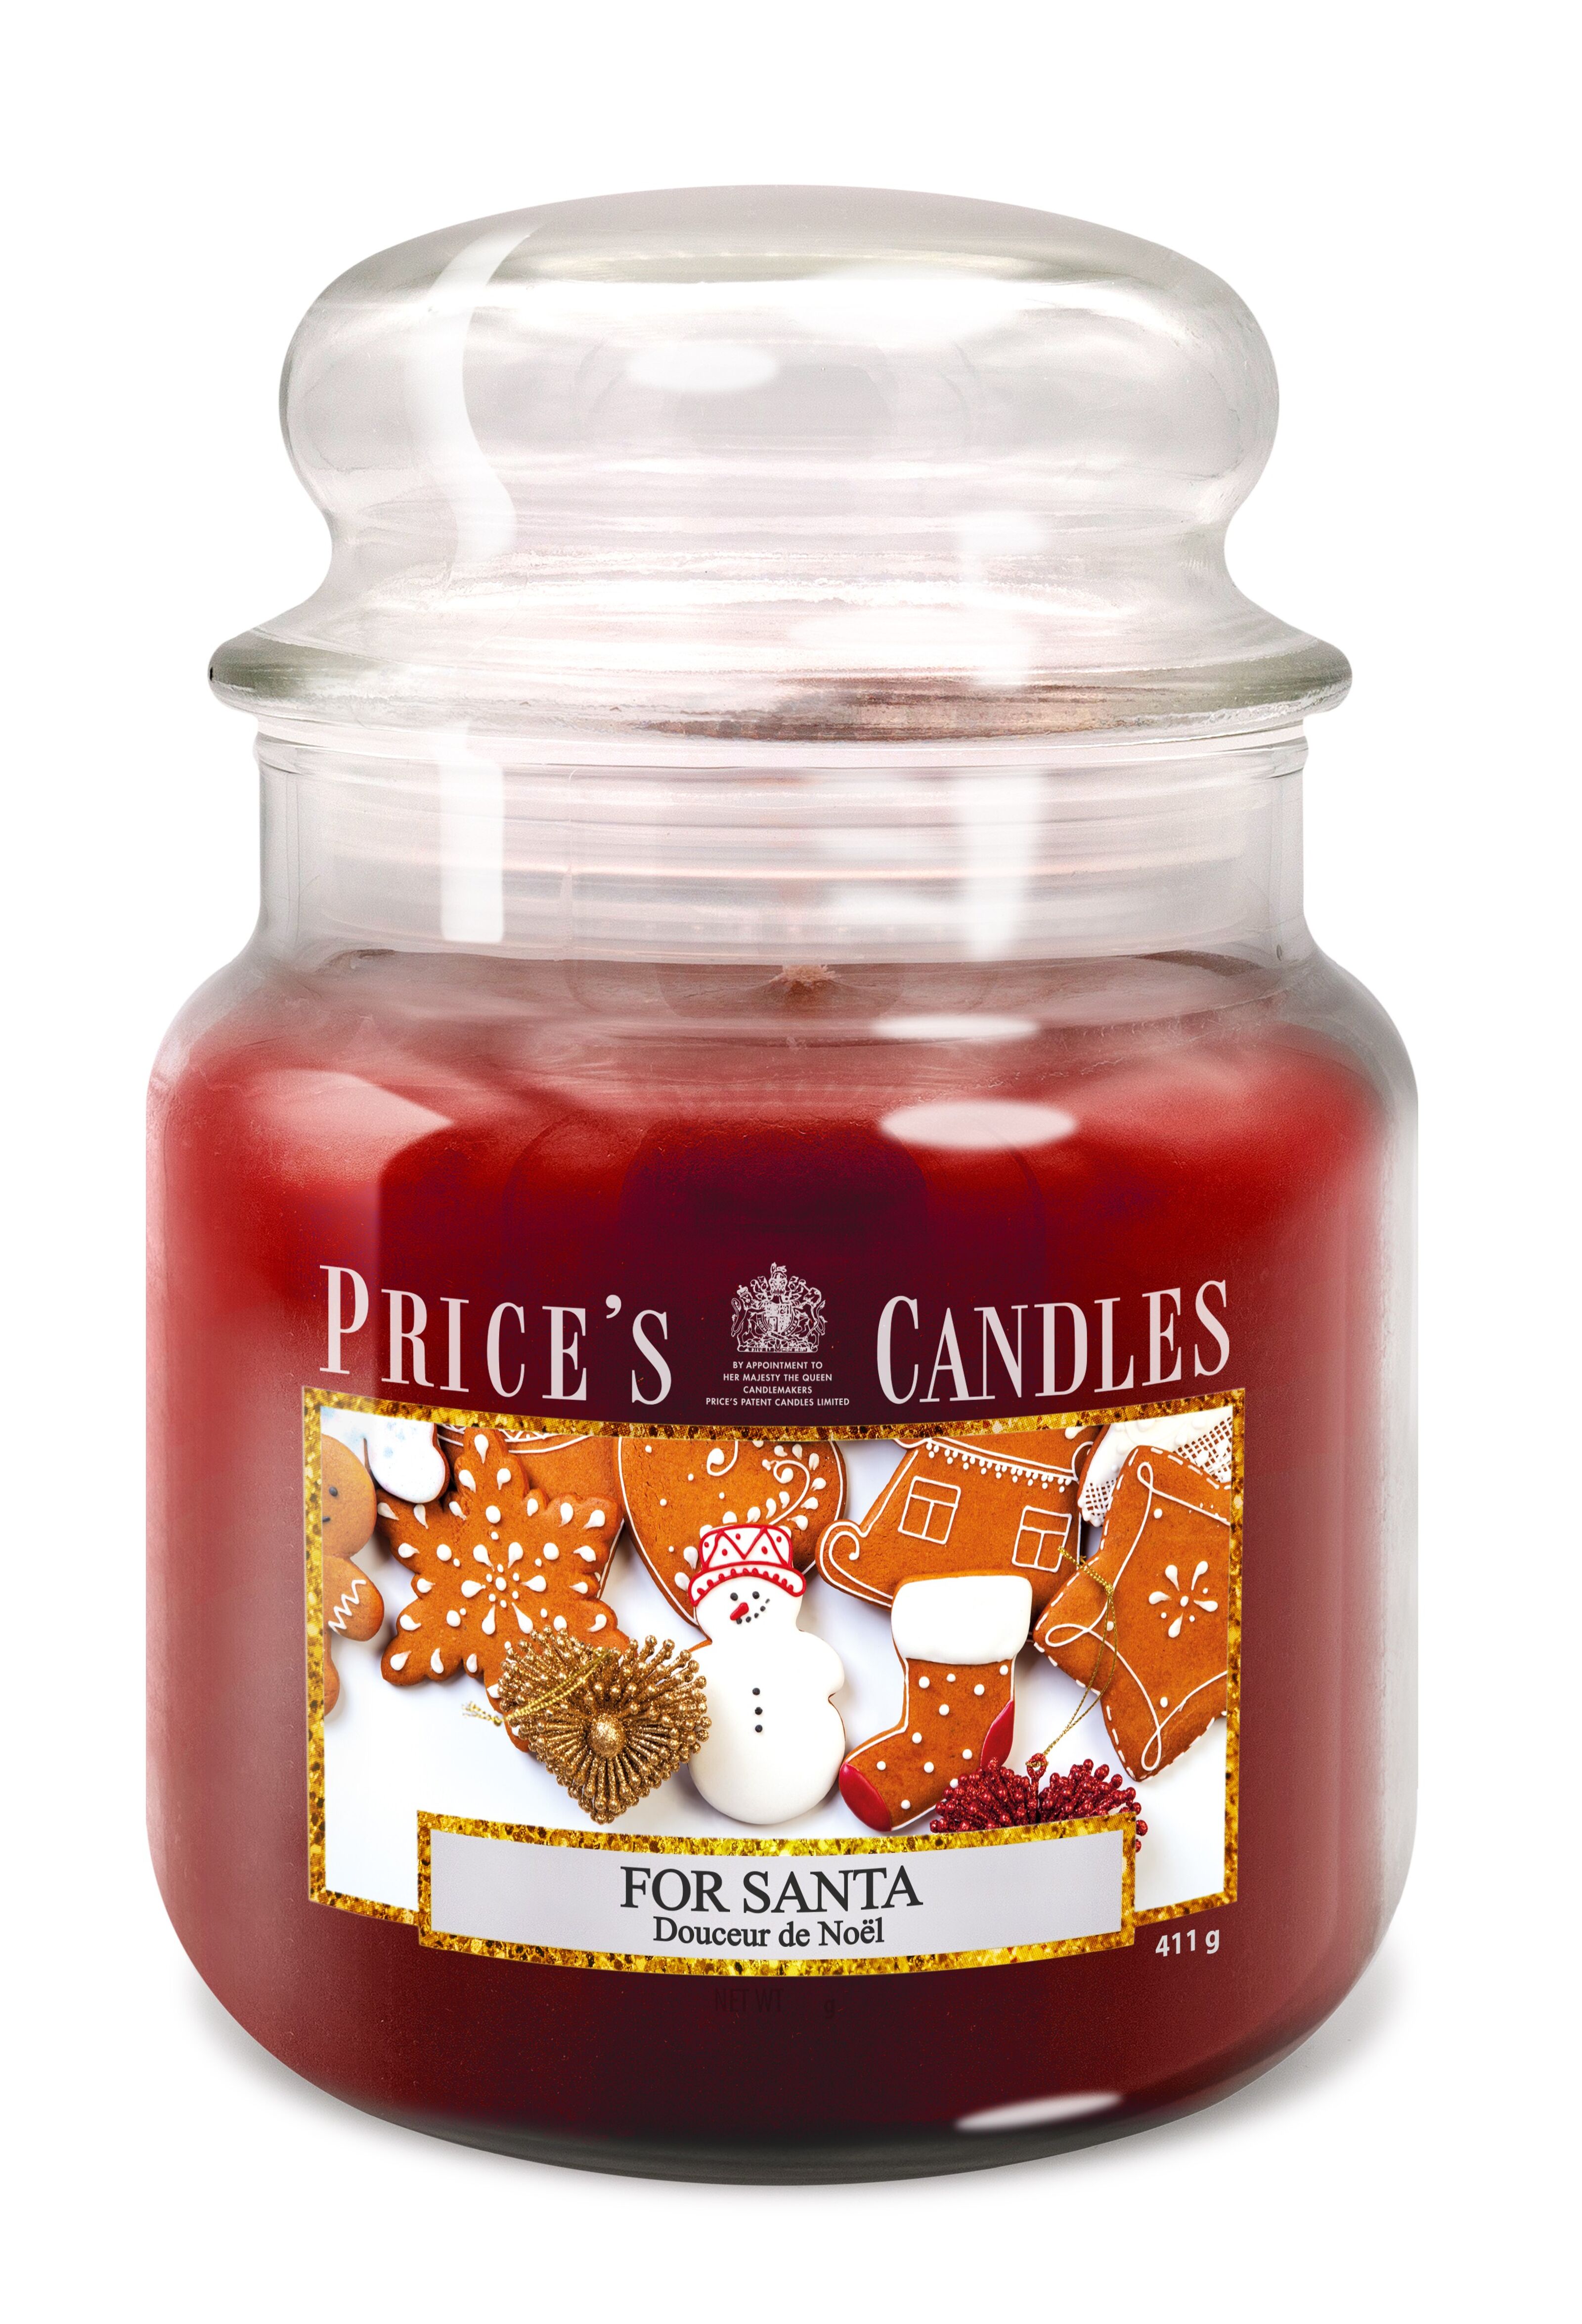 Price's Patent Candles